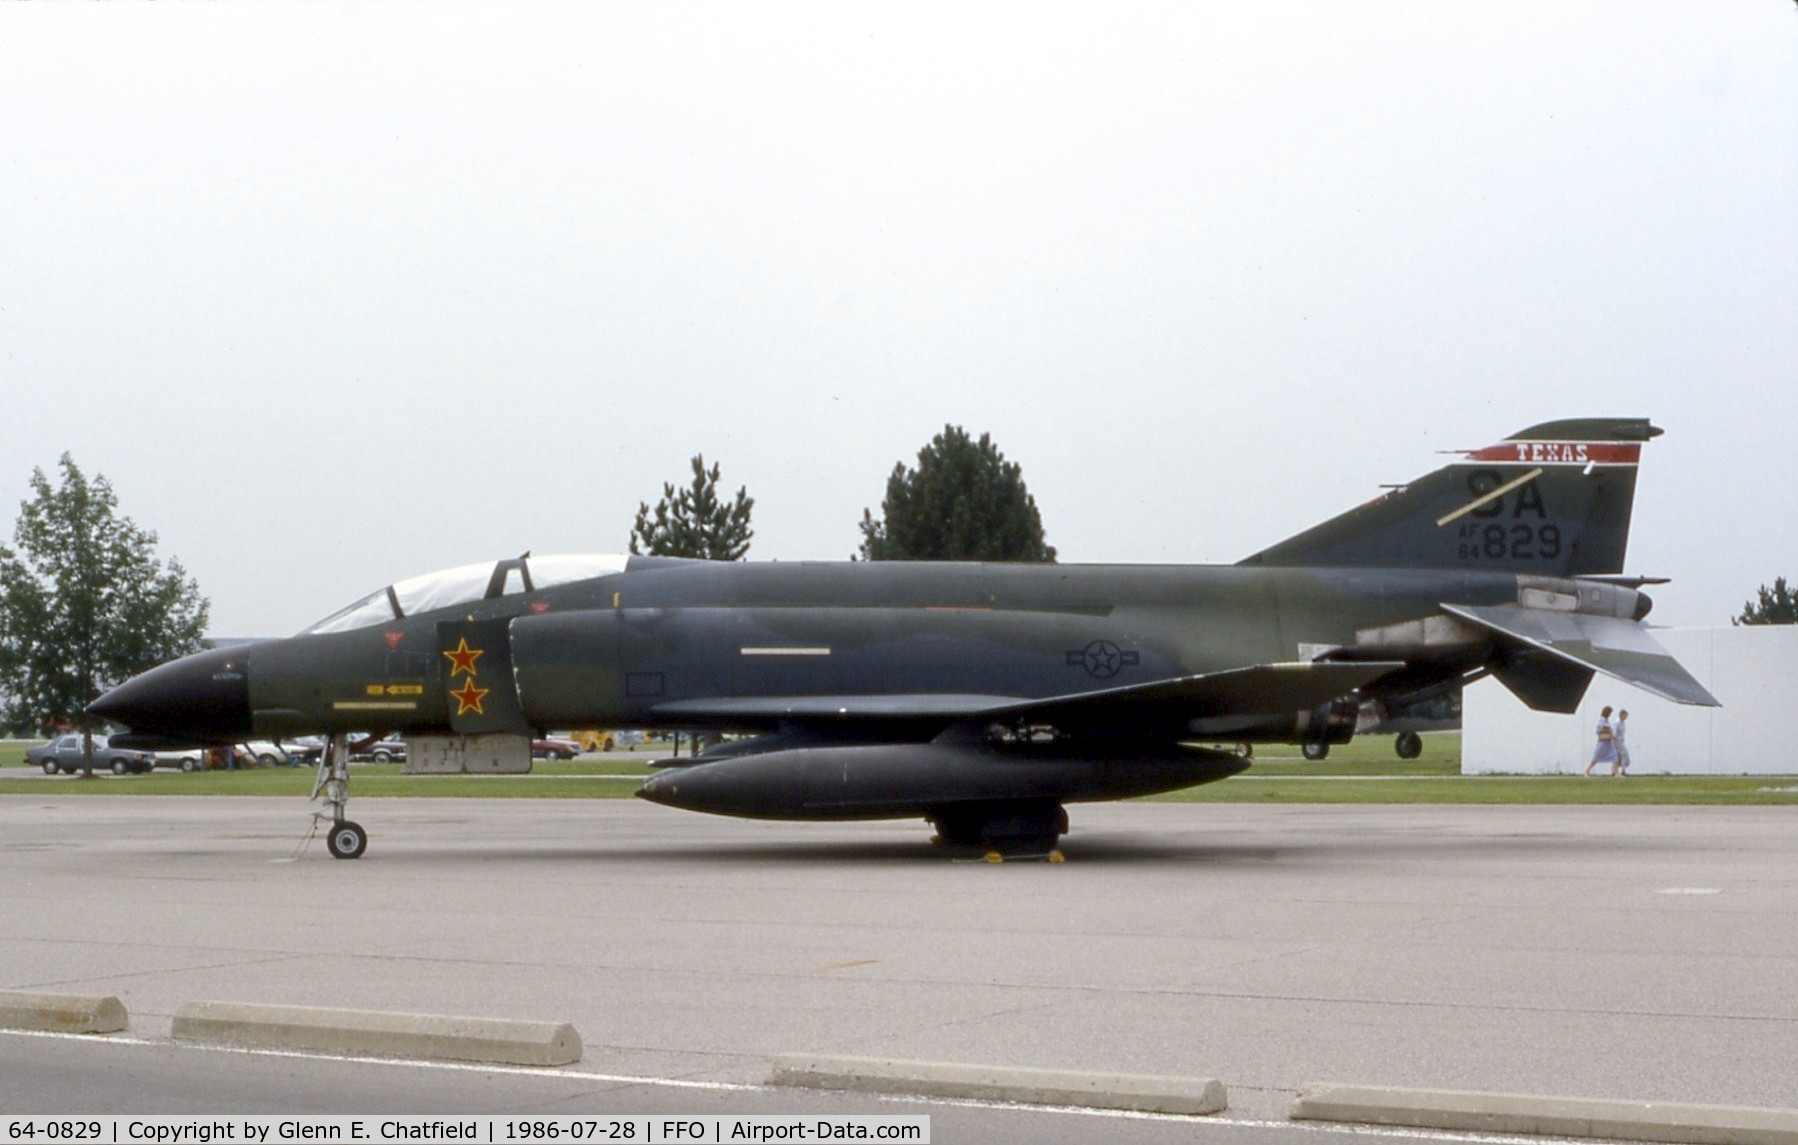 64-0829, 1964 McDonnell F-4C Phantom II C/N 1169, F-4C at the National Museum of the U.S. Air Force